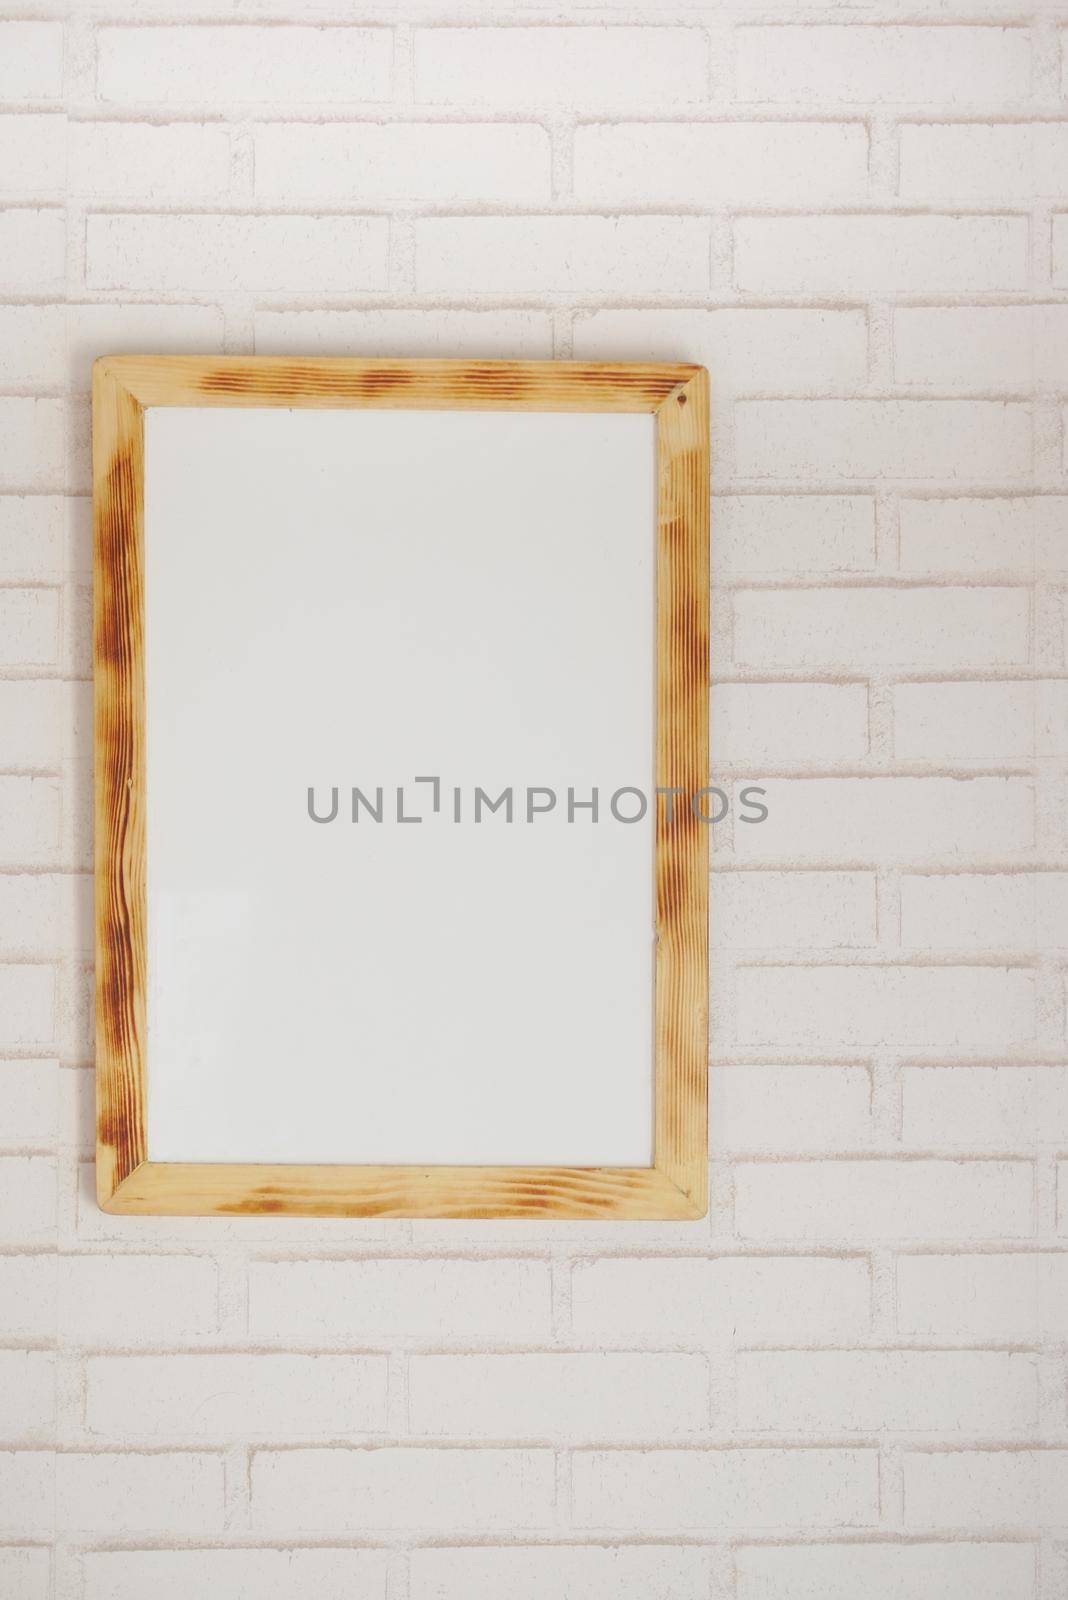 Black frame mockup on table against white wall, by towfiq007